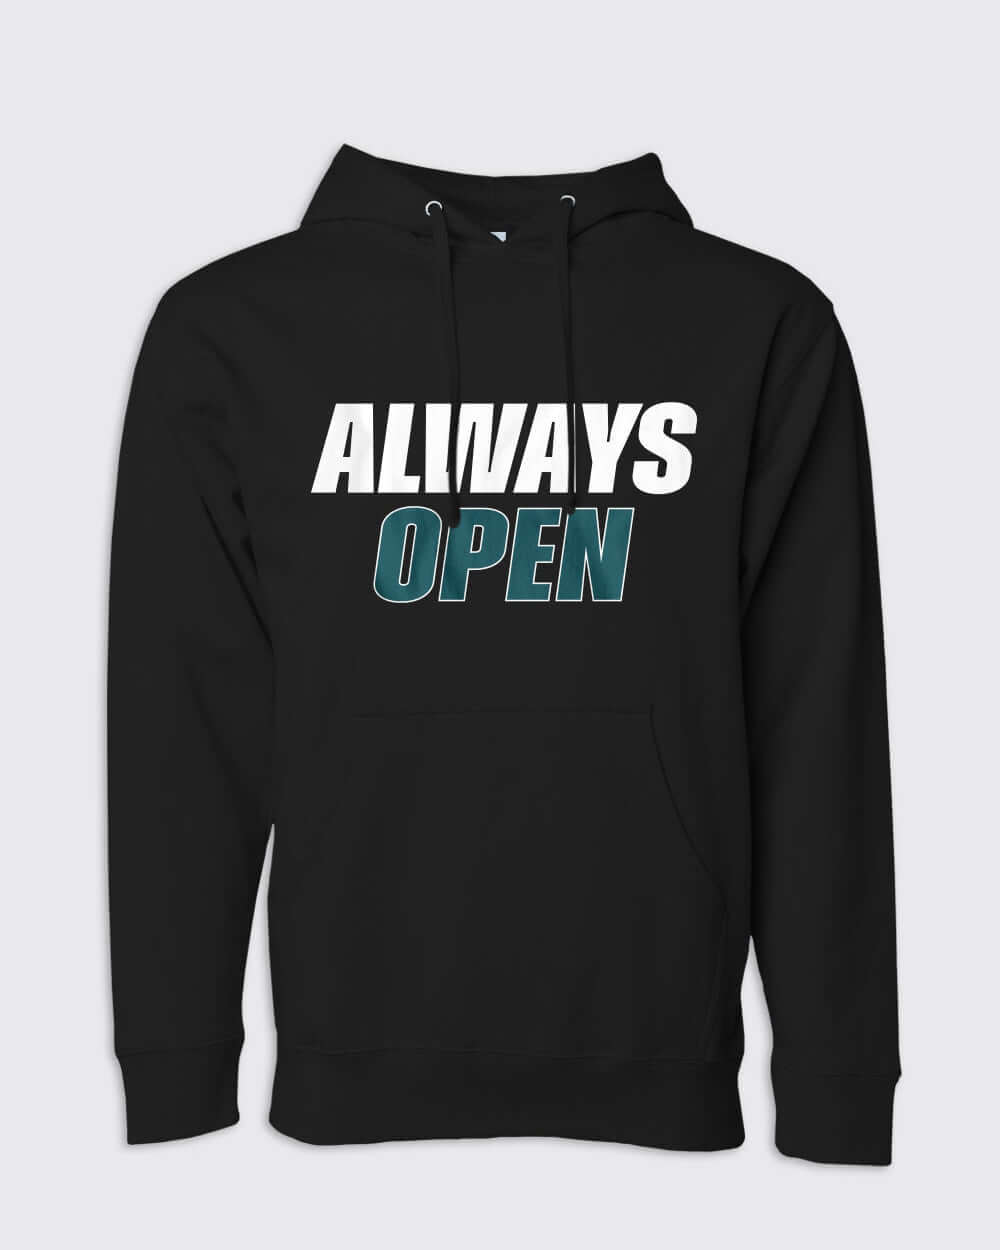 Always Open Hoodie - Eagles, Hoodies - Philly Sports Shirts